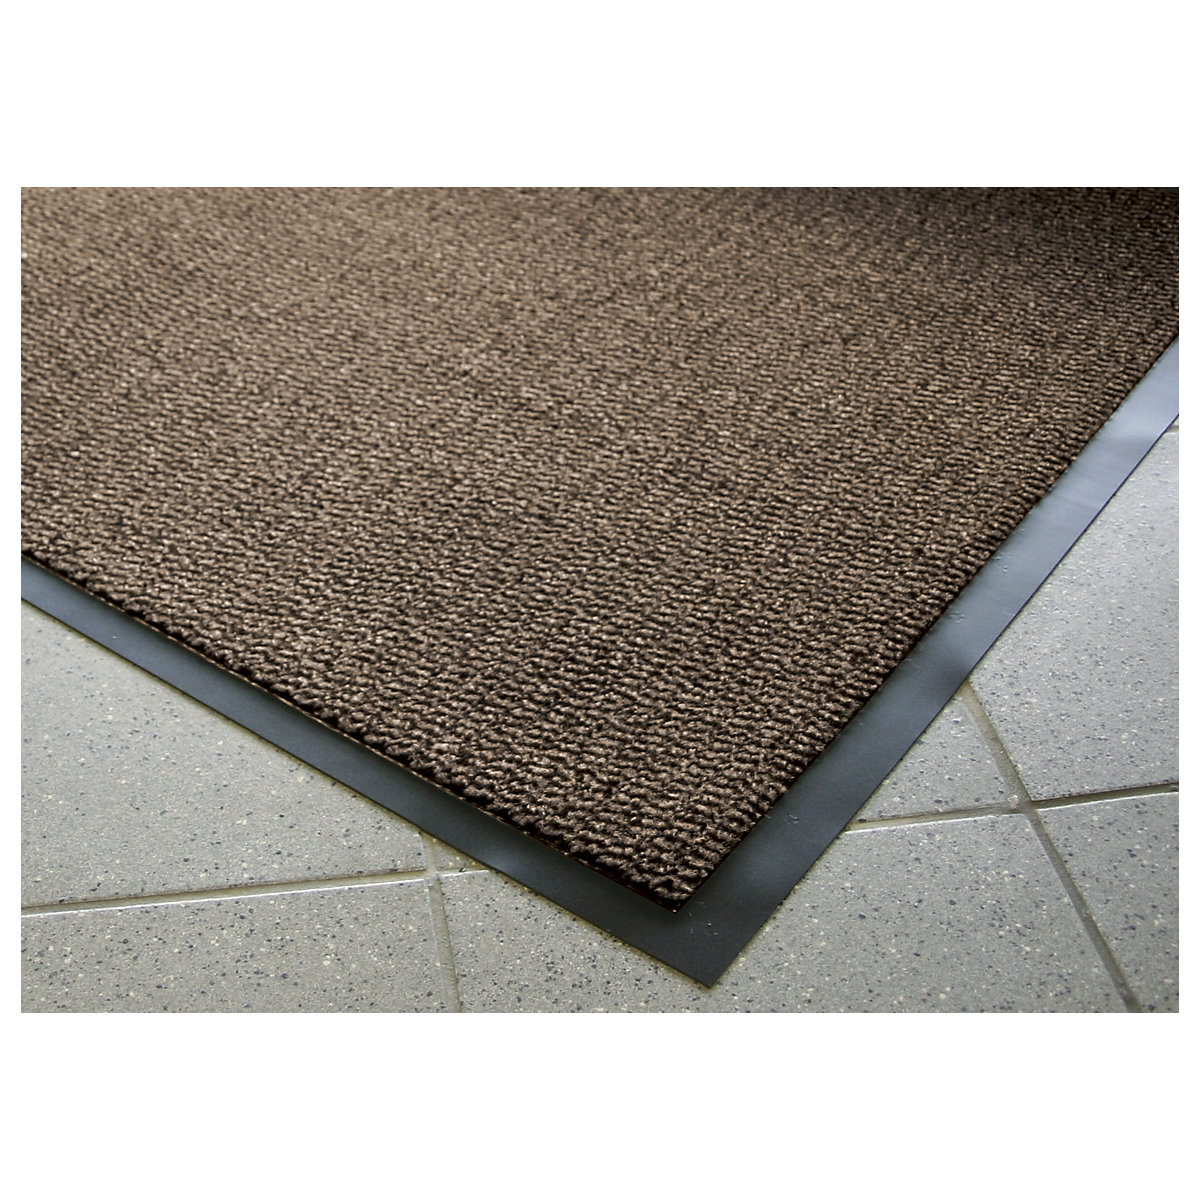 Entrance matting for indoor use, polypropylene pile, width 1200 mm, sold by the metre, black / brown